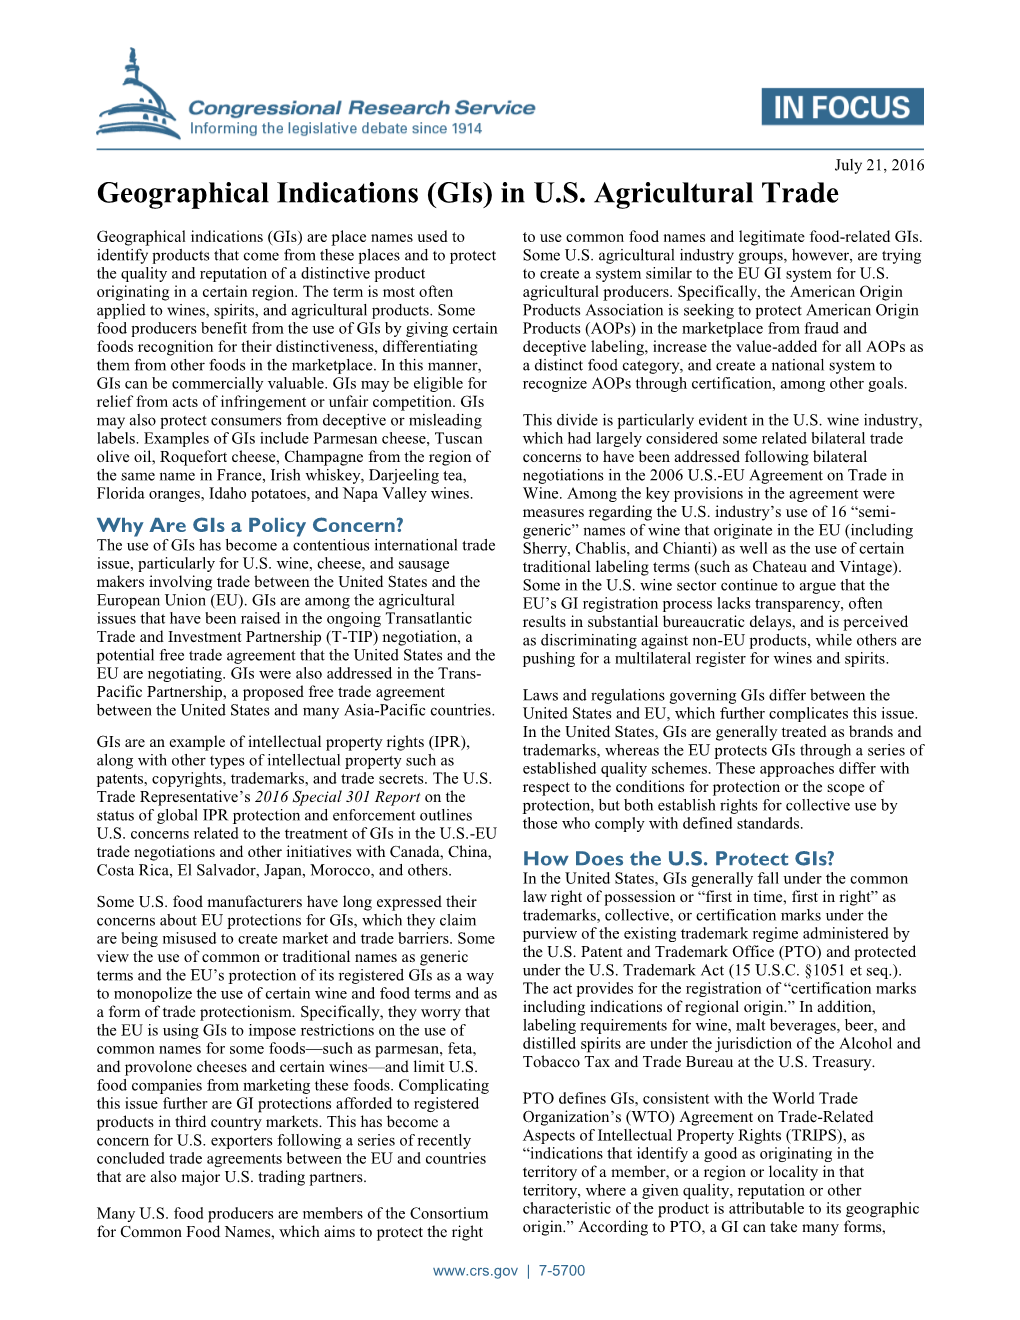 Geographical Indications (Gis) in U.S. Agricultural Trade